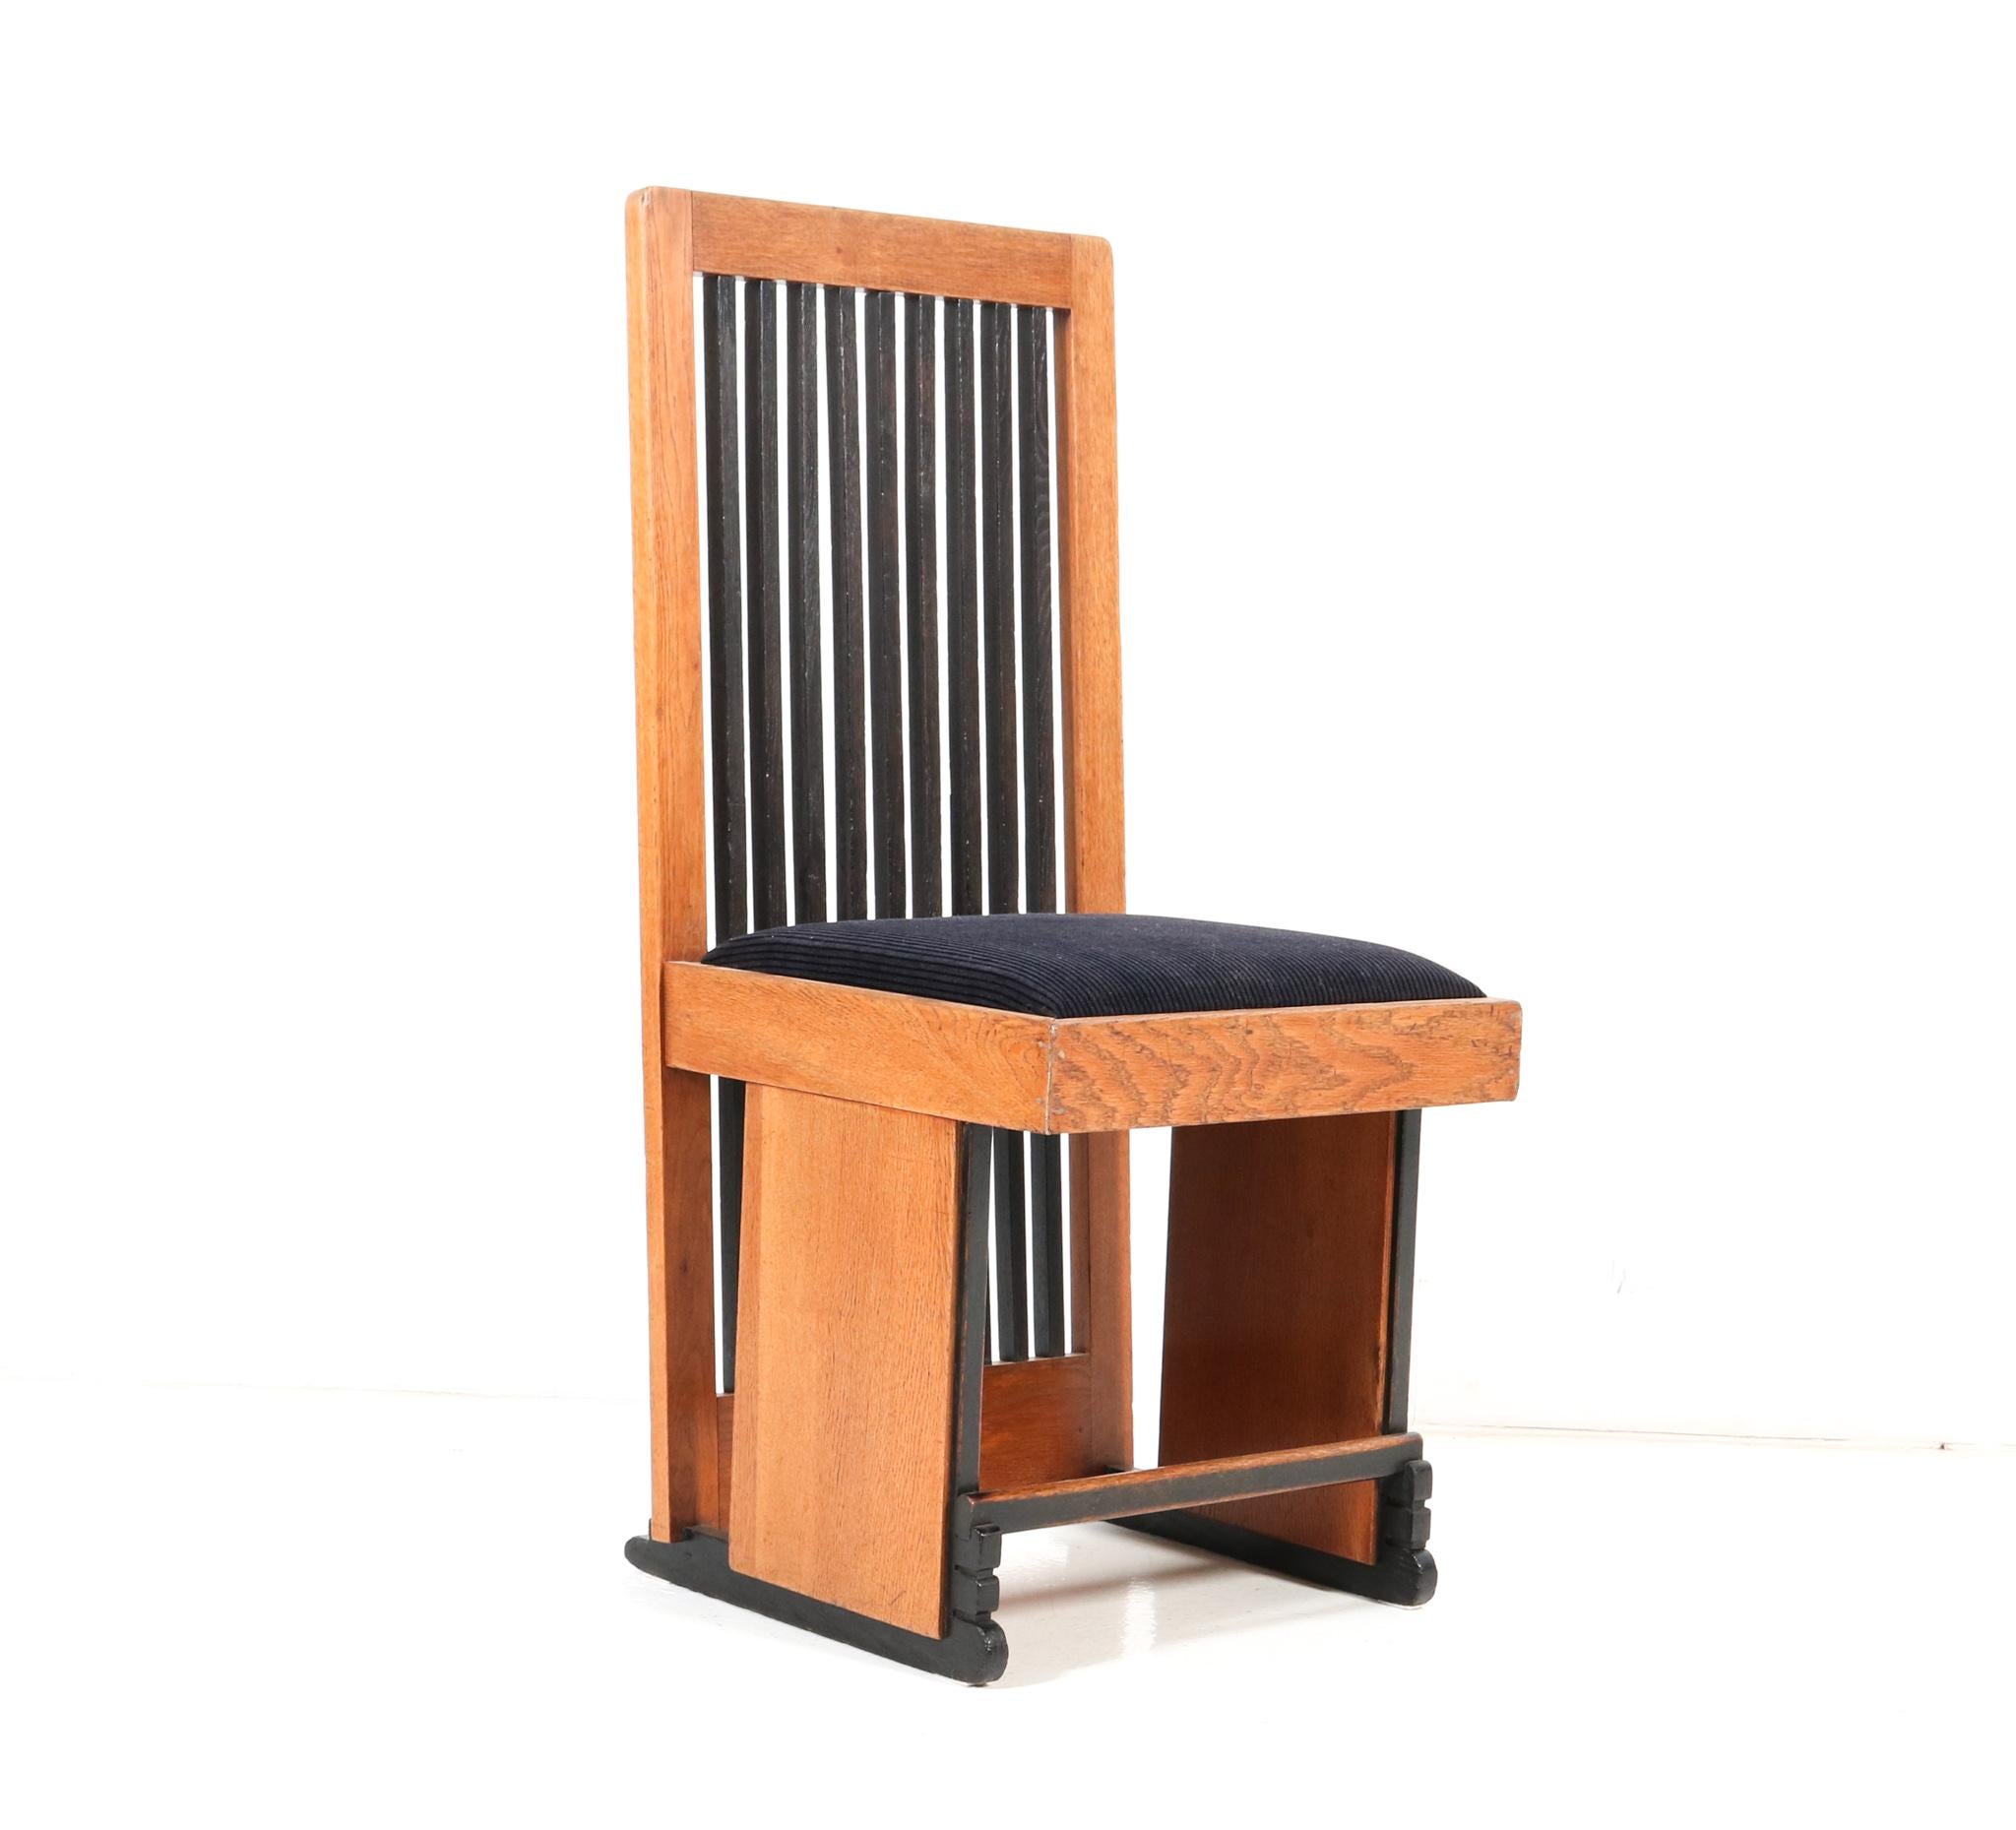  Oak Art Deco Modernist High Back Dining Room Chairs by Architect Caspers, 1920s For Sale 6